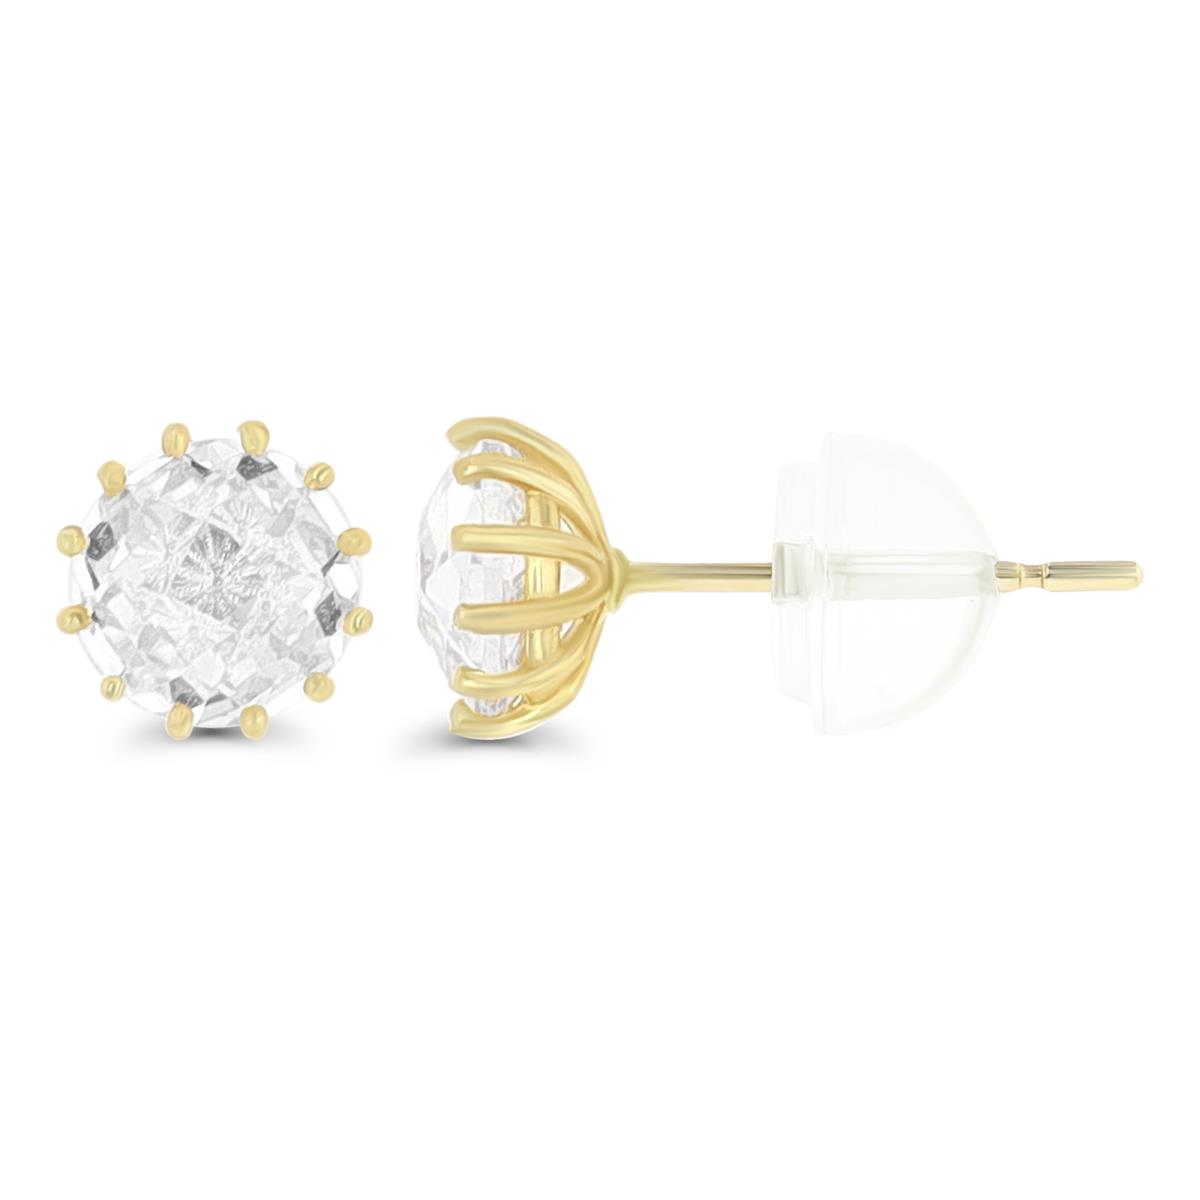 14K Yellow Gold 6mm Checkerboard Cut CZ Solitaire Stud Earring